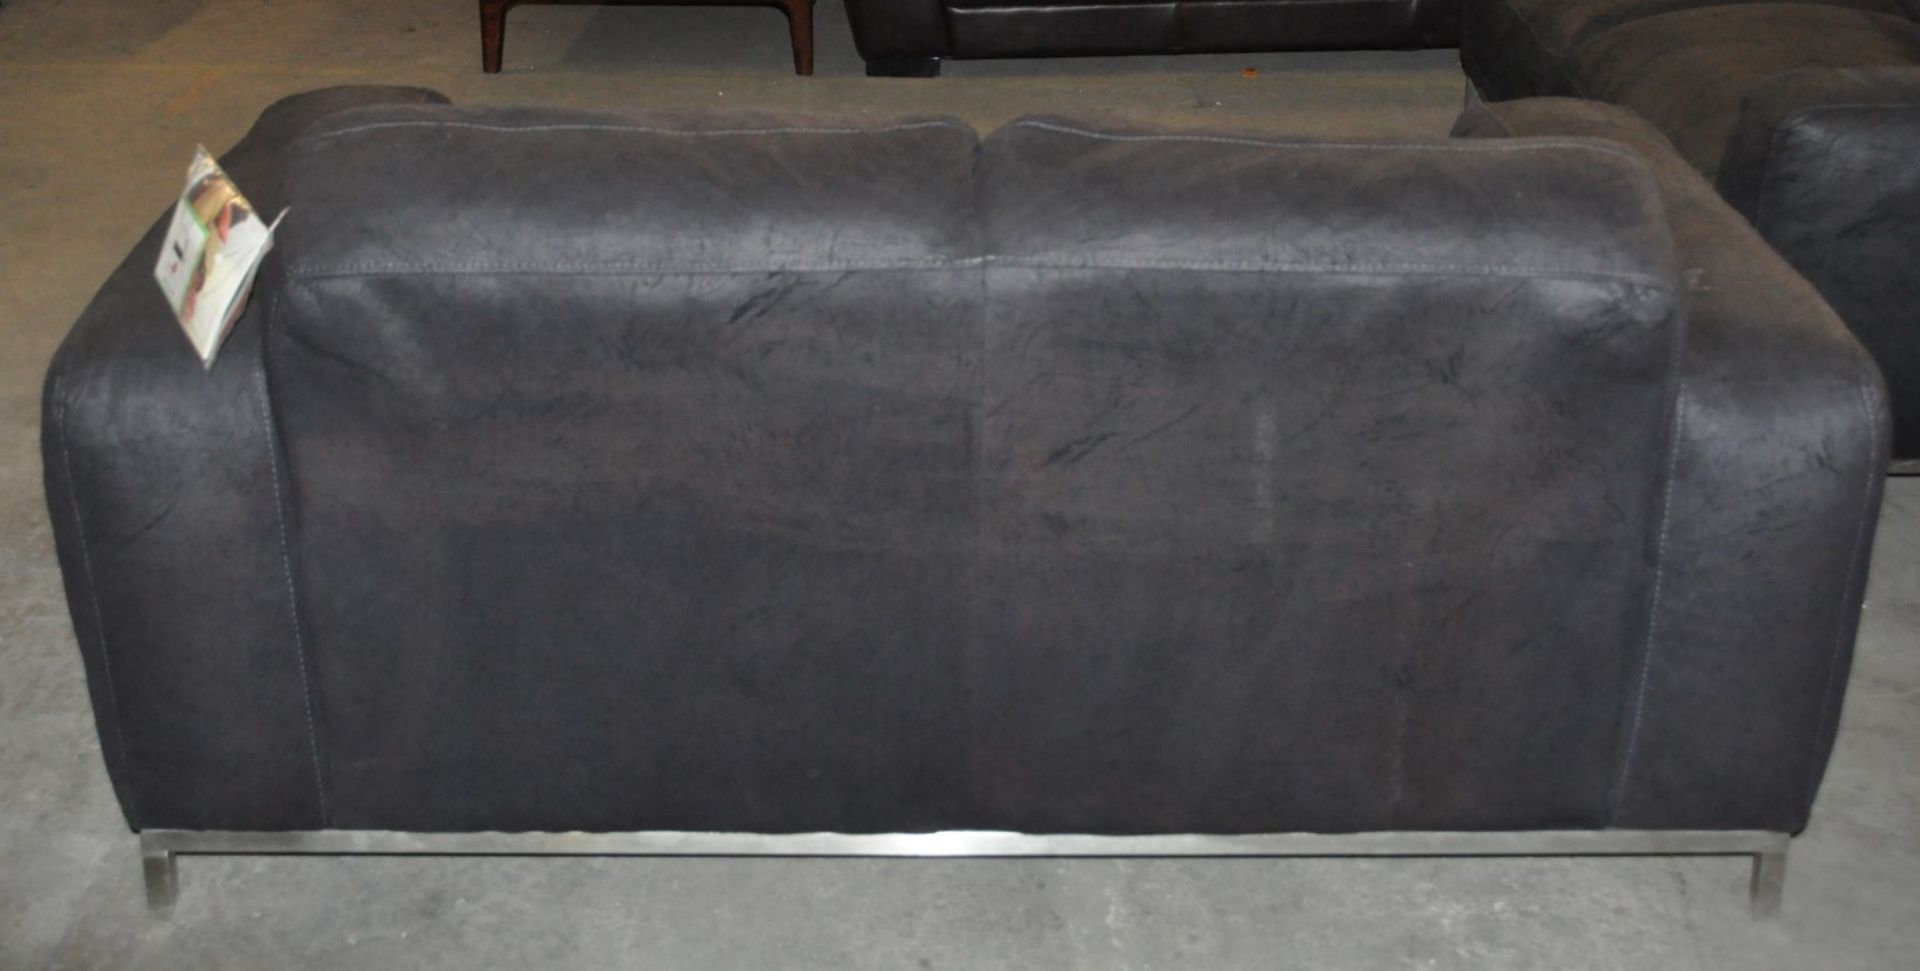 1 x 'Valletta' 3 & 2 Seater Sofa in a Black Crackle Fabric – Ex Display - Dimensions (2 Seater) - Image 3 of 6